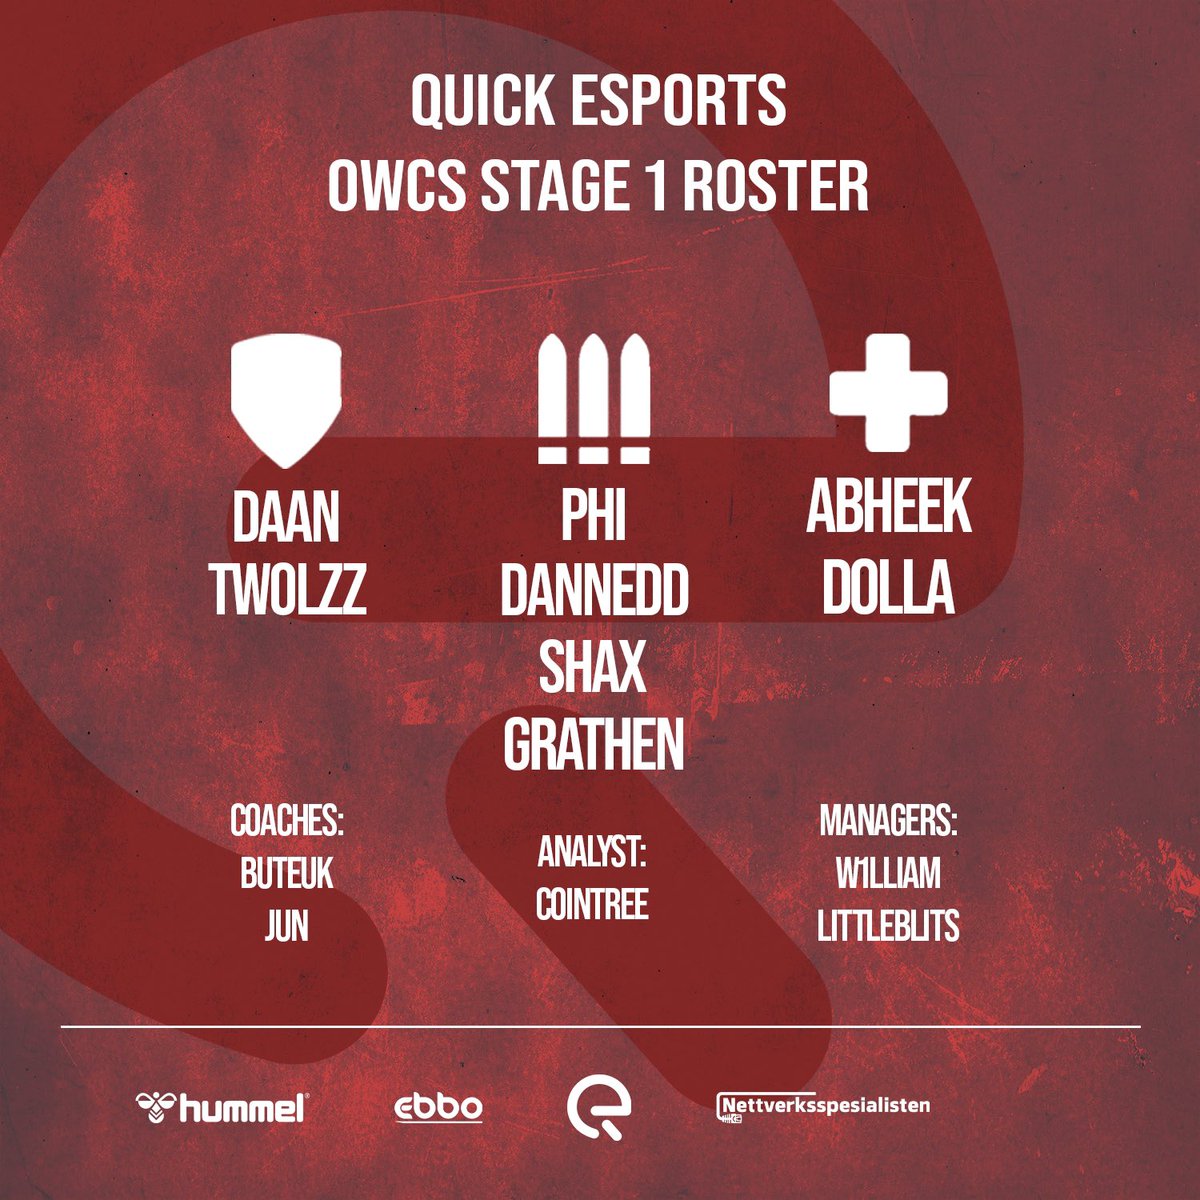 Now introducing, our roster for OWCS stage 1

🛡️🇳🇱 @twolzz_ow 
🛡️🇳🇱 @Daan_ow 
⚔️🇩🇪 @phi_ow 
⚔️🇸🇪 @Danneddow 
⚔️🇮🇪 @Grathenz 
⚔️🇩🇰 @ShaxOW 
💉🇫🇮 @Dolla_Risti 
💉🇬🇧 @abheekpatra1 

🧠🇰🇷 @BUTEUK_OW 
🧠🇰🇷 @junseo52 
📊🇭🇰 @Cointree_OW 
🐢🇸🇪 @W1LLIAM_Ow 
🐢🇳🇱 @littleblits_OW